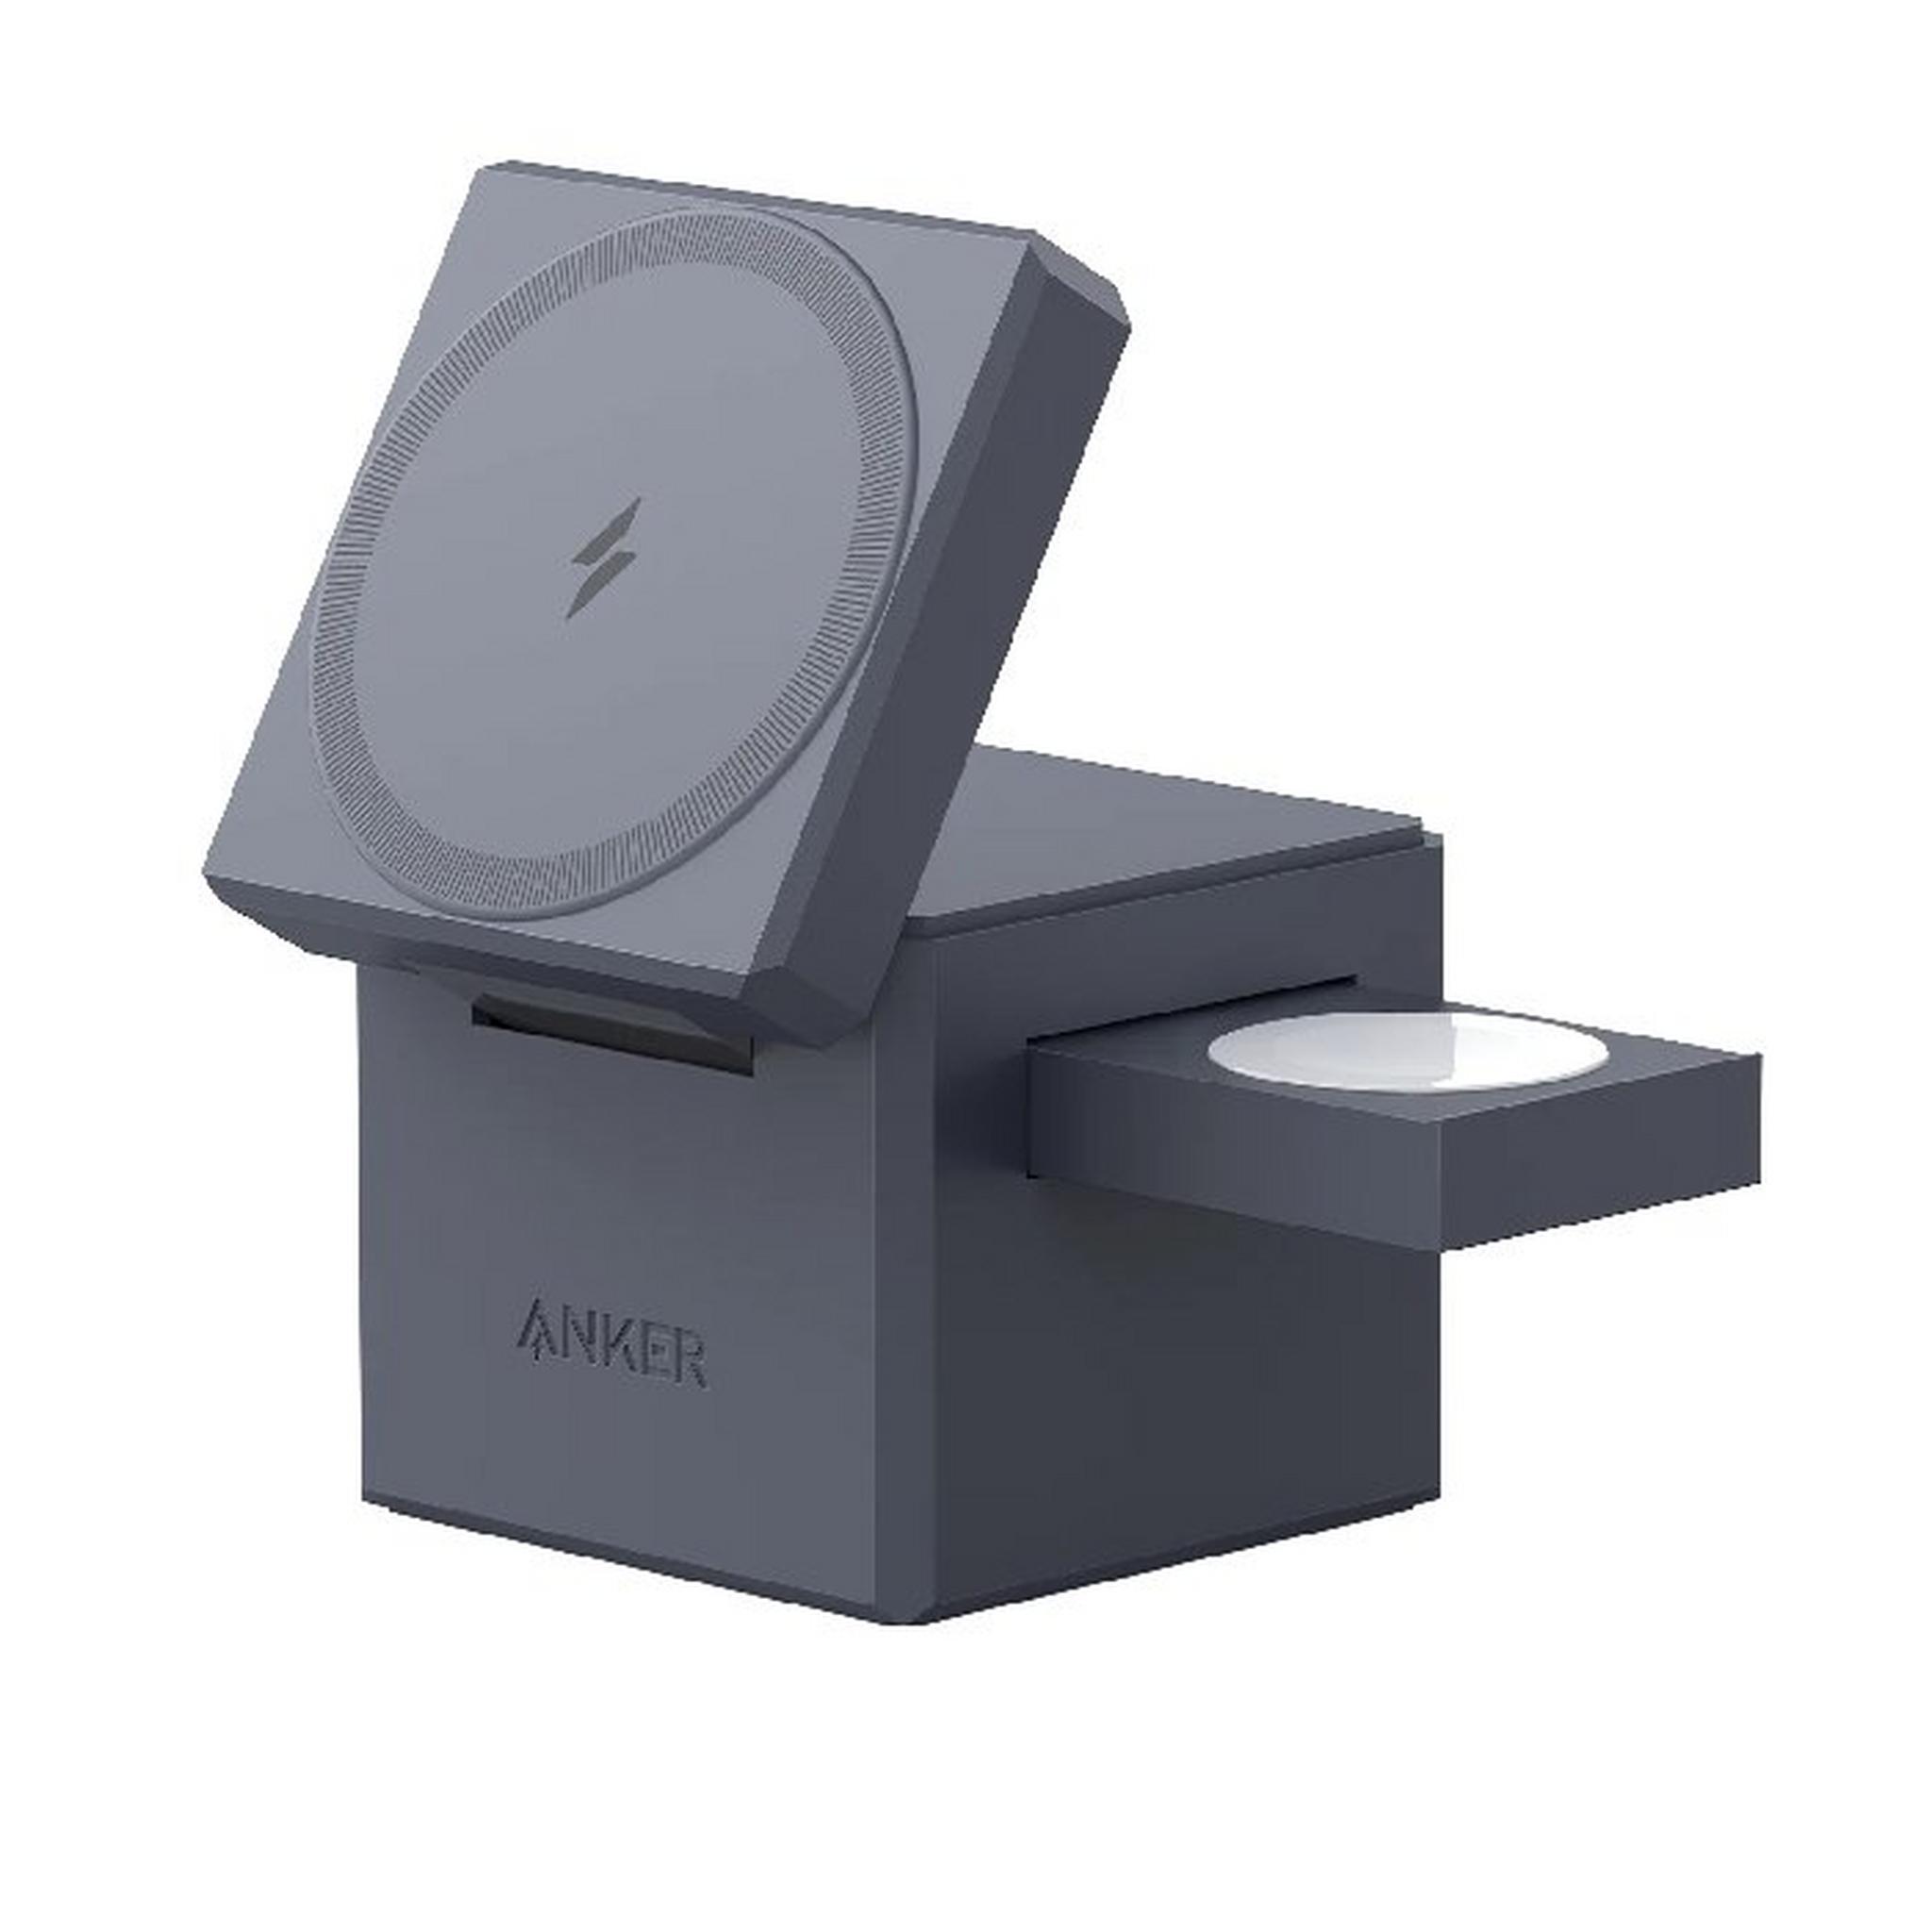 Anker 3-in-1 Cube with MagSafe 1 Wireless Charger, Y1811KA1 – Gray